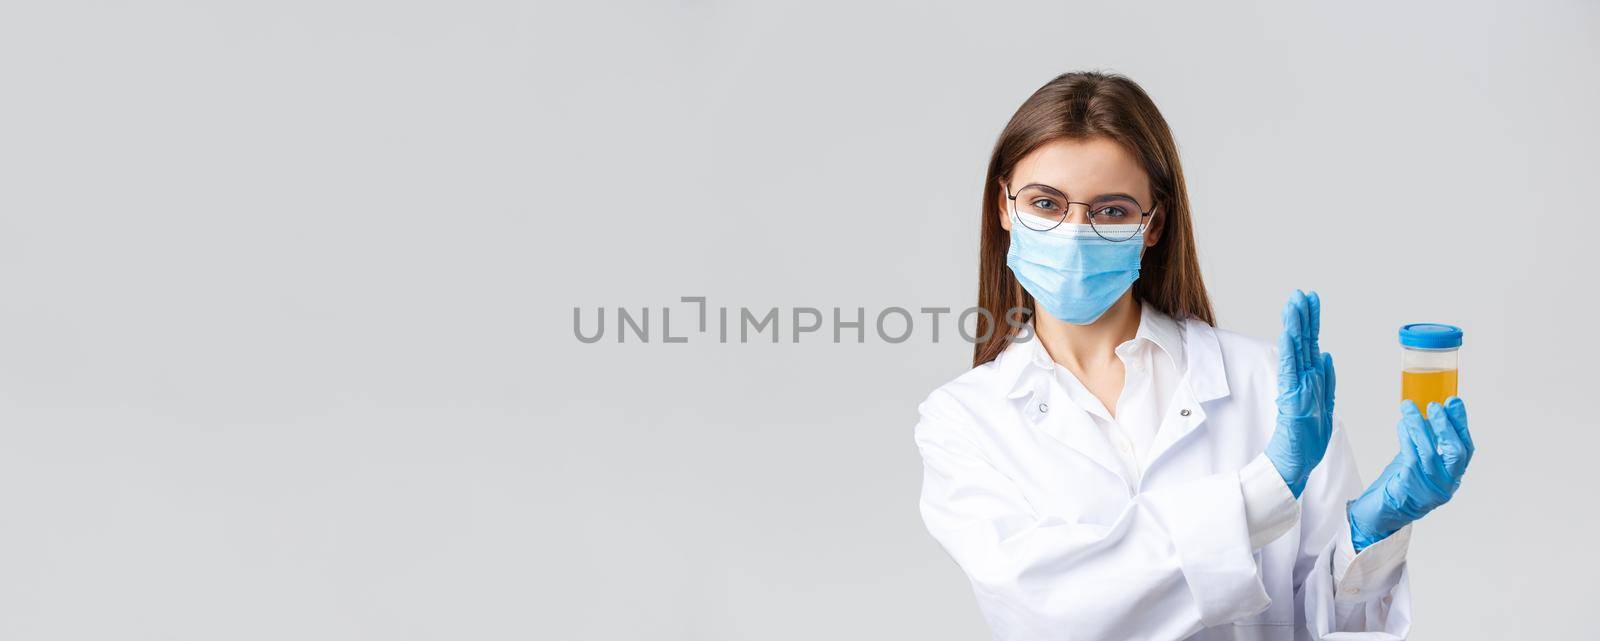 Covid-19, medical research, diagnosis, healthcare workers and quarantine concept. Doctor, intern in medical mask and gloves, lab clinic testing urine sample, show rejection and refusal gesture.